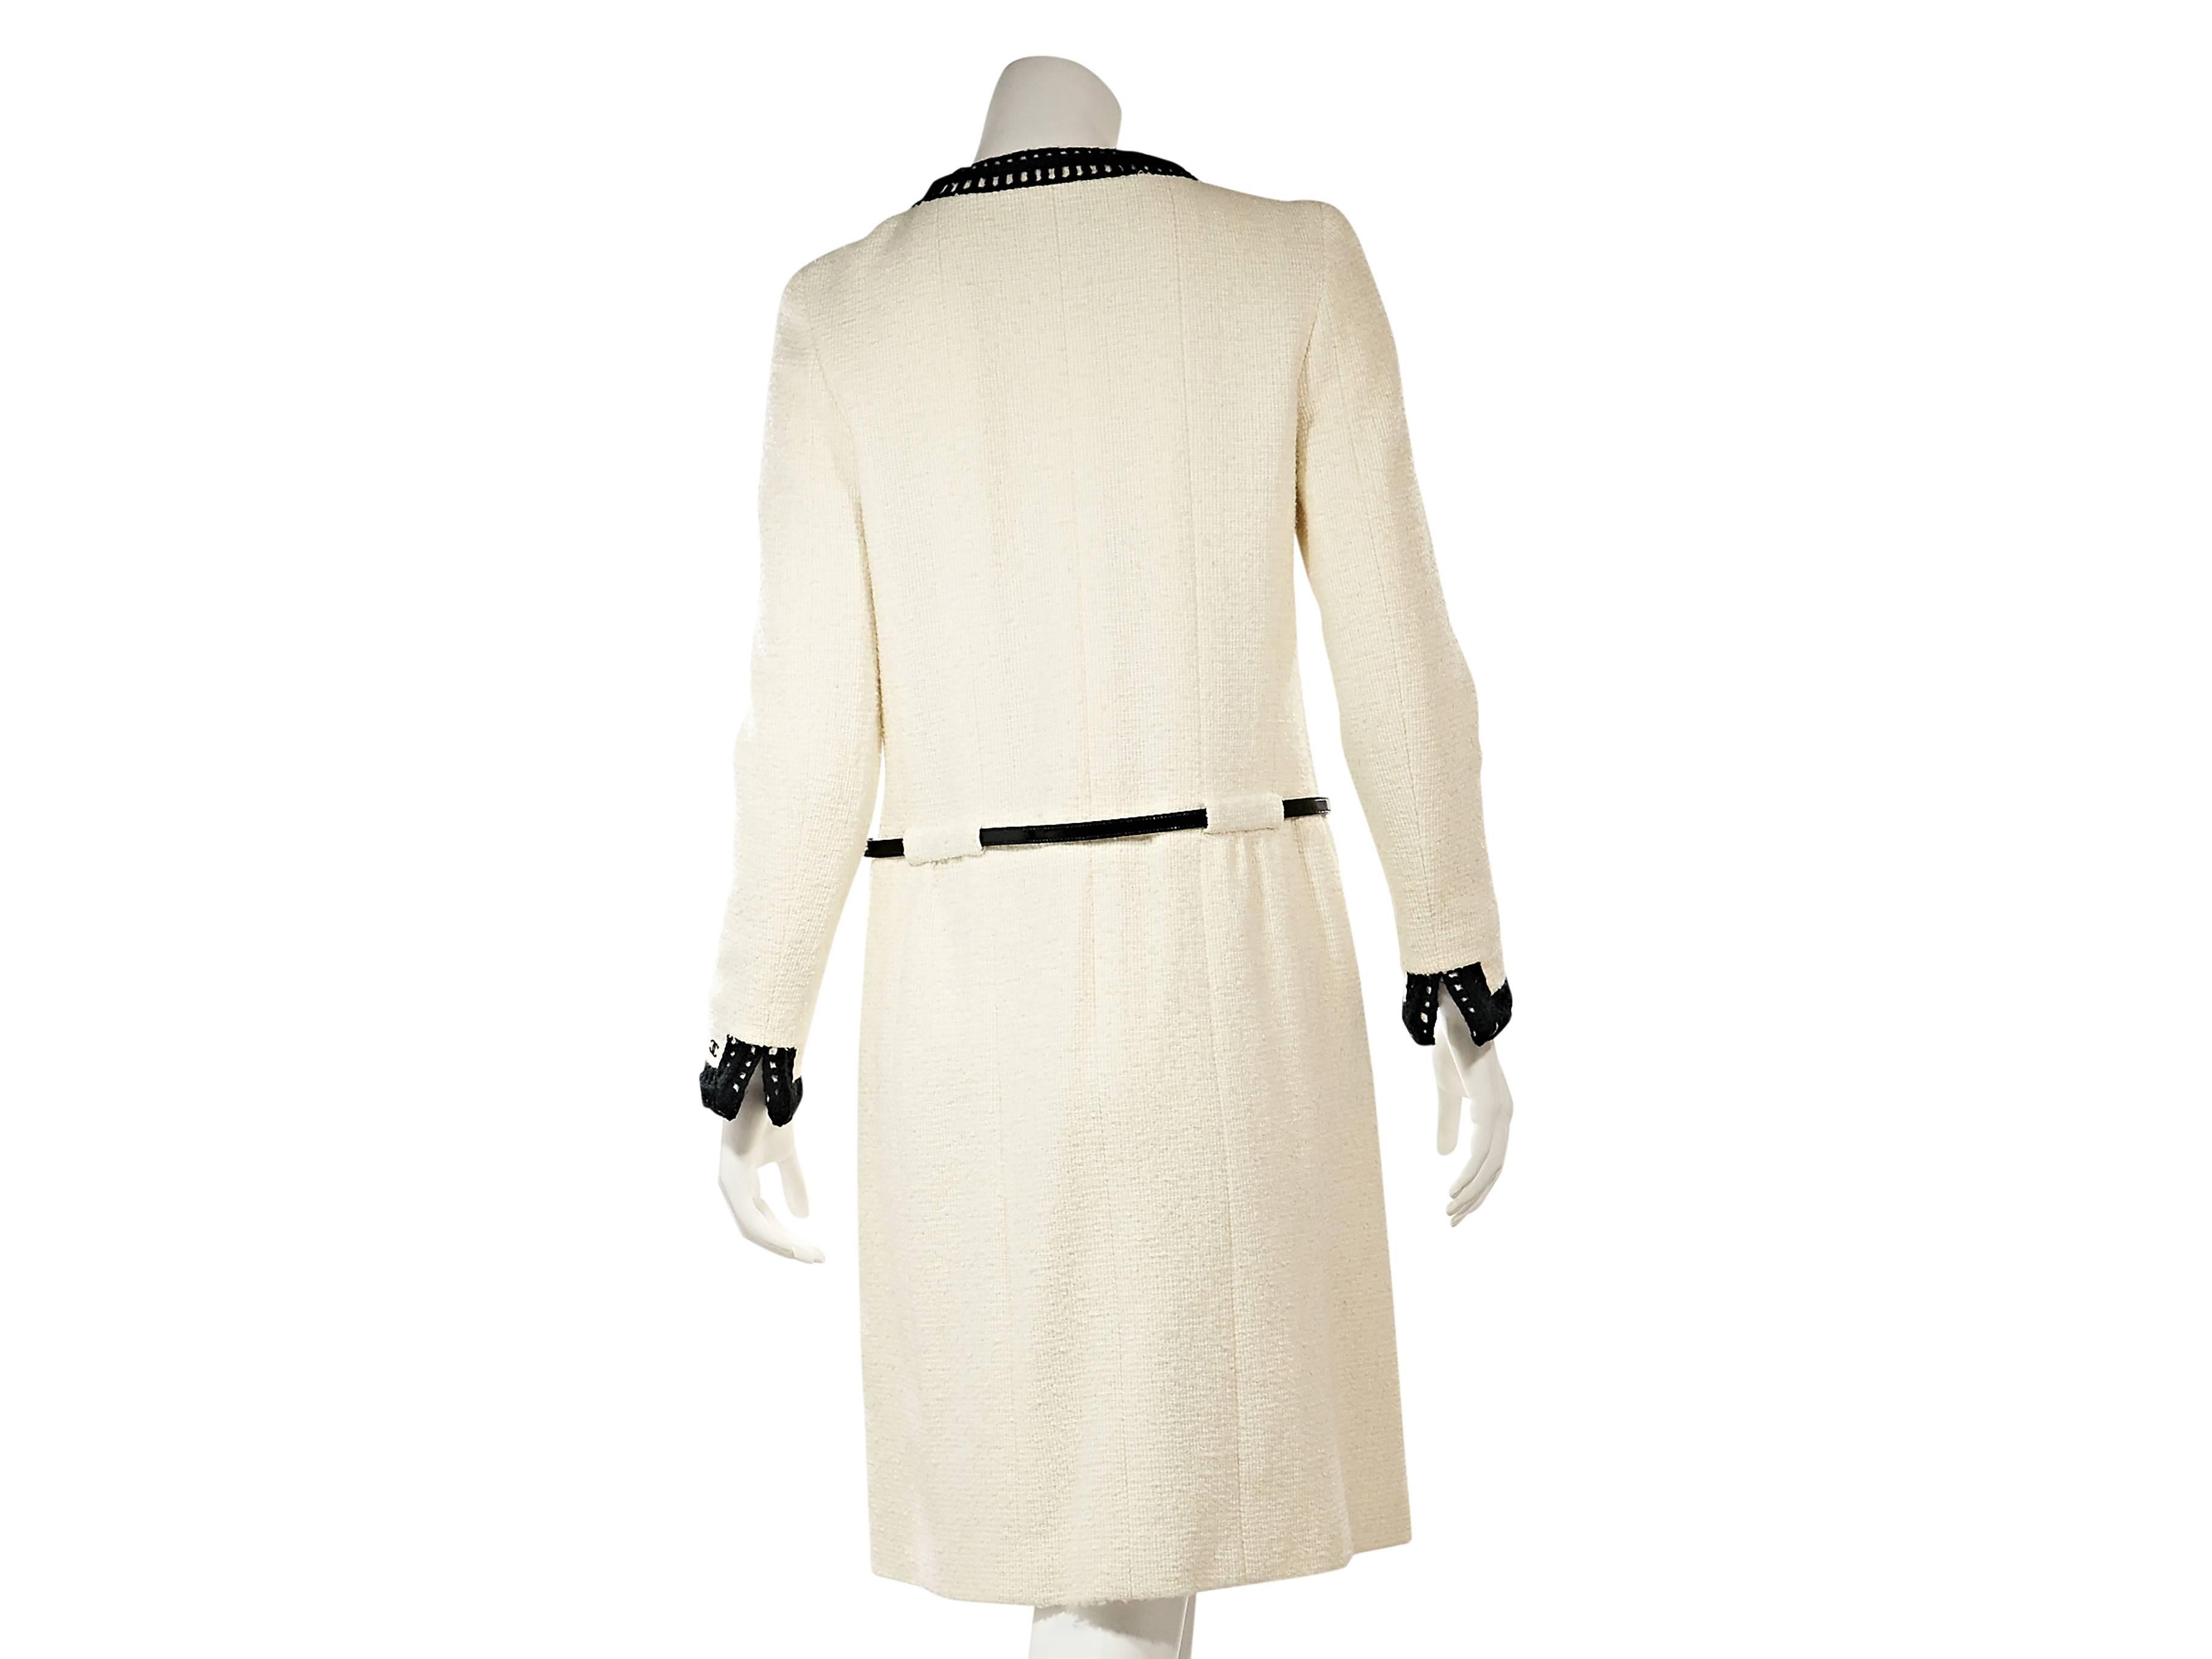 Product details:  Cream cashmere coat by Chanel.  Features black knit trim.  Jeweleneck.  Long sleeves.  Slit cuffs.  Concealed front closure.  Belted waist.  Four front patch pockets.  Label size FR 40. ﻿
Condition: Excellent. 